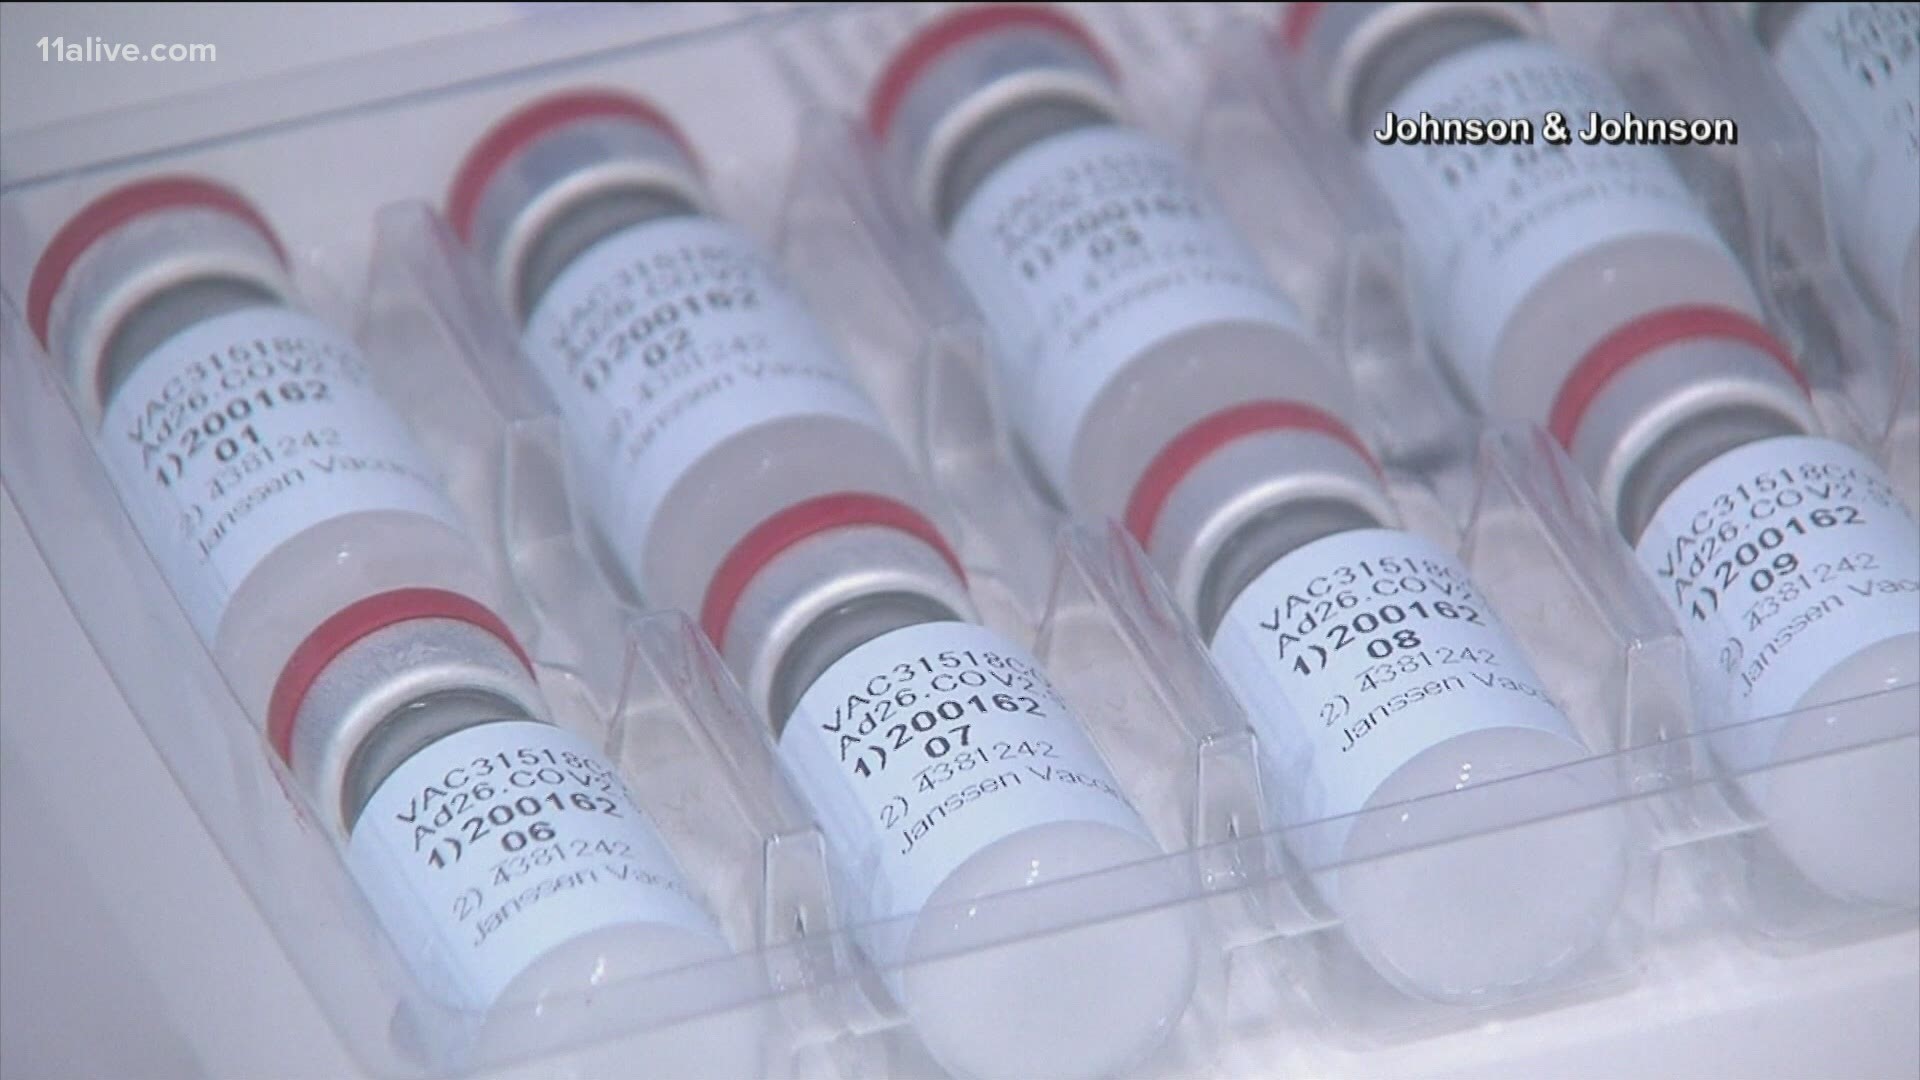 The CDC's outside advisory panel has decided to table a vote on what's next for the Johnson and Johnson vaccine, which means the vaccine will continue to be paused.